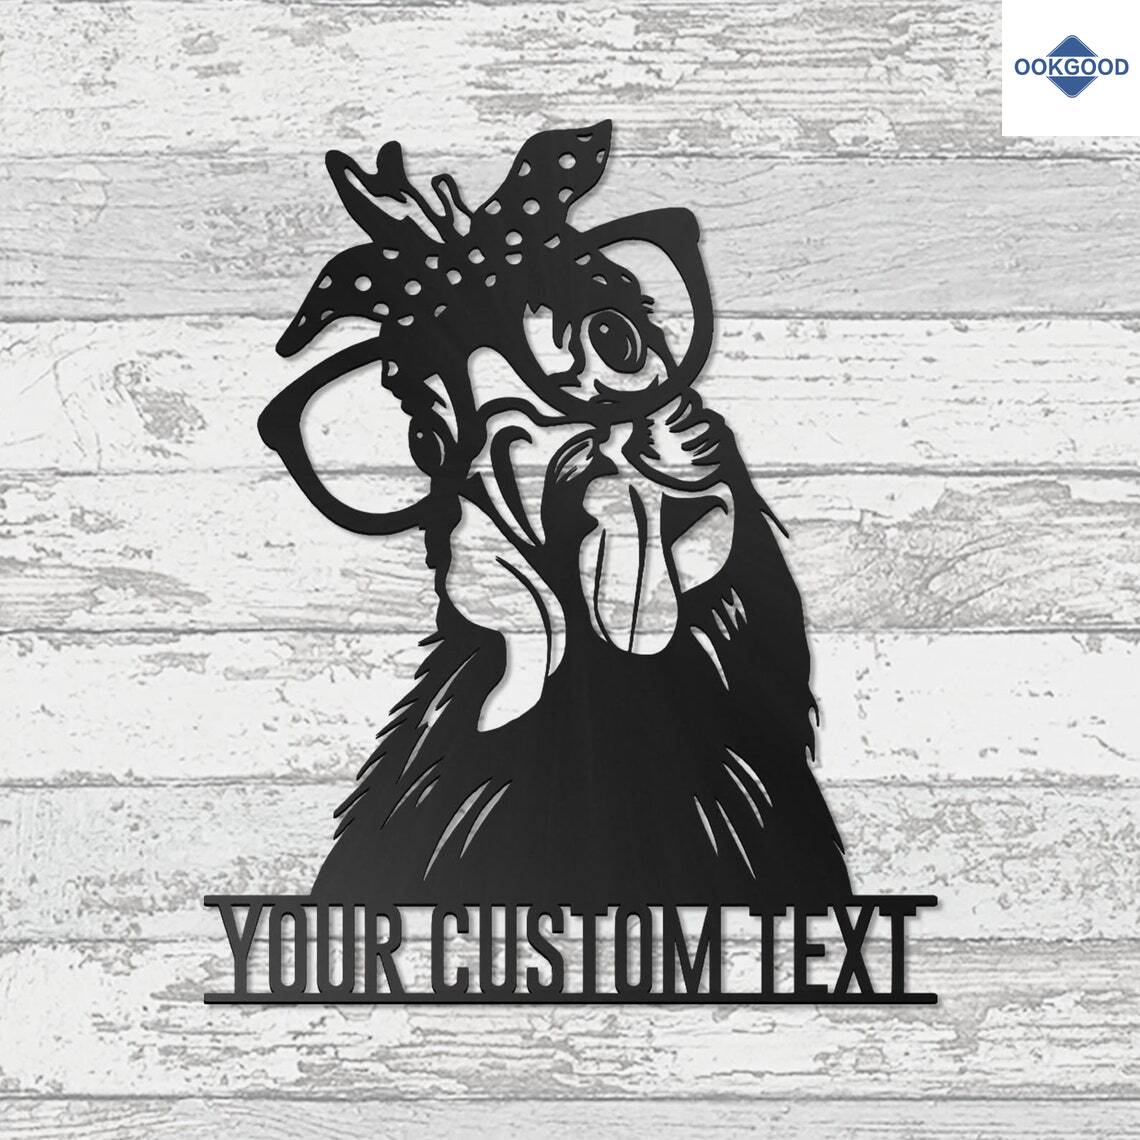 Personalized Custom Chicken Wearing Glasses Metal Art Sign